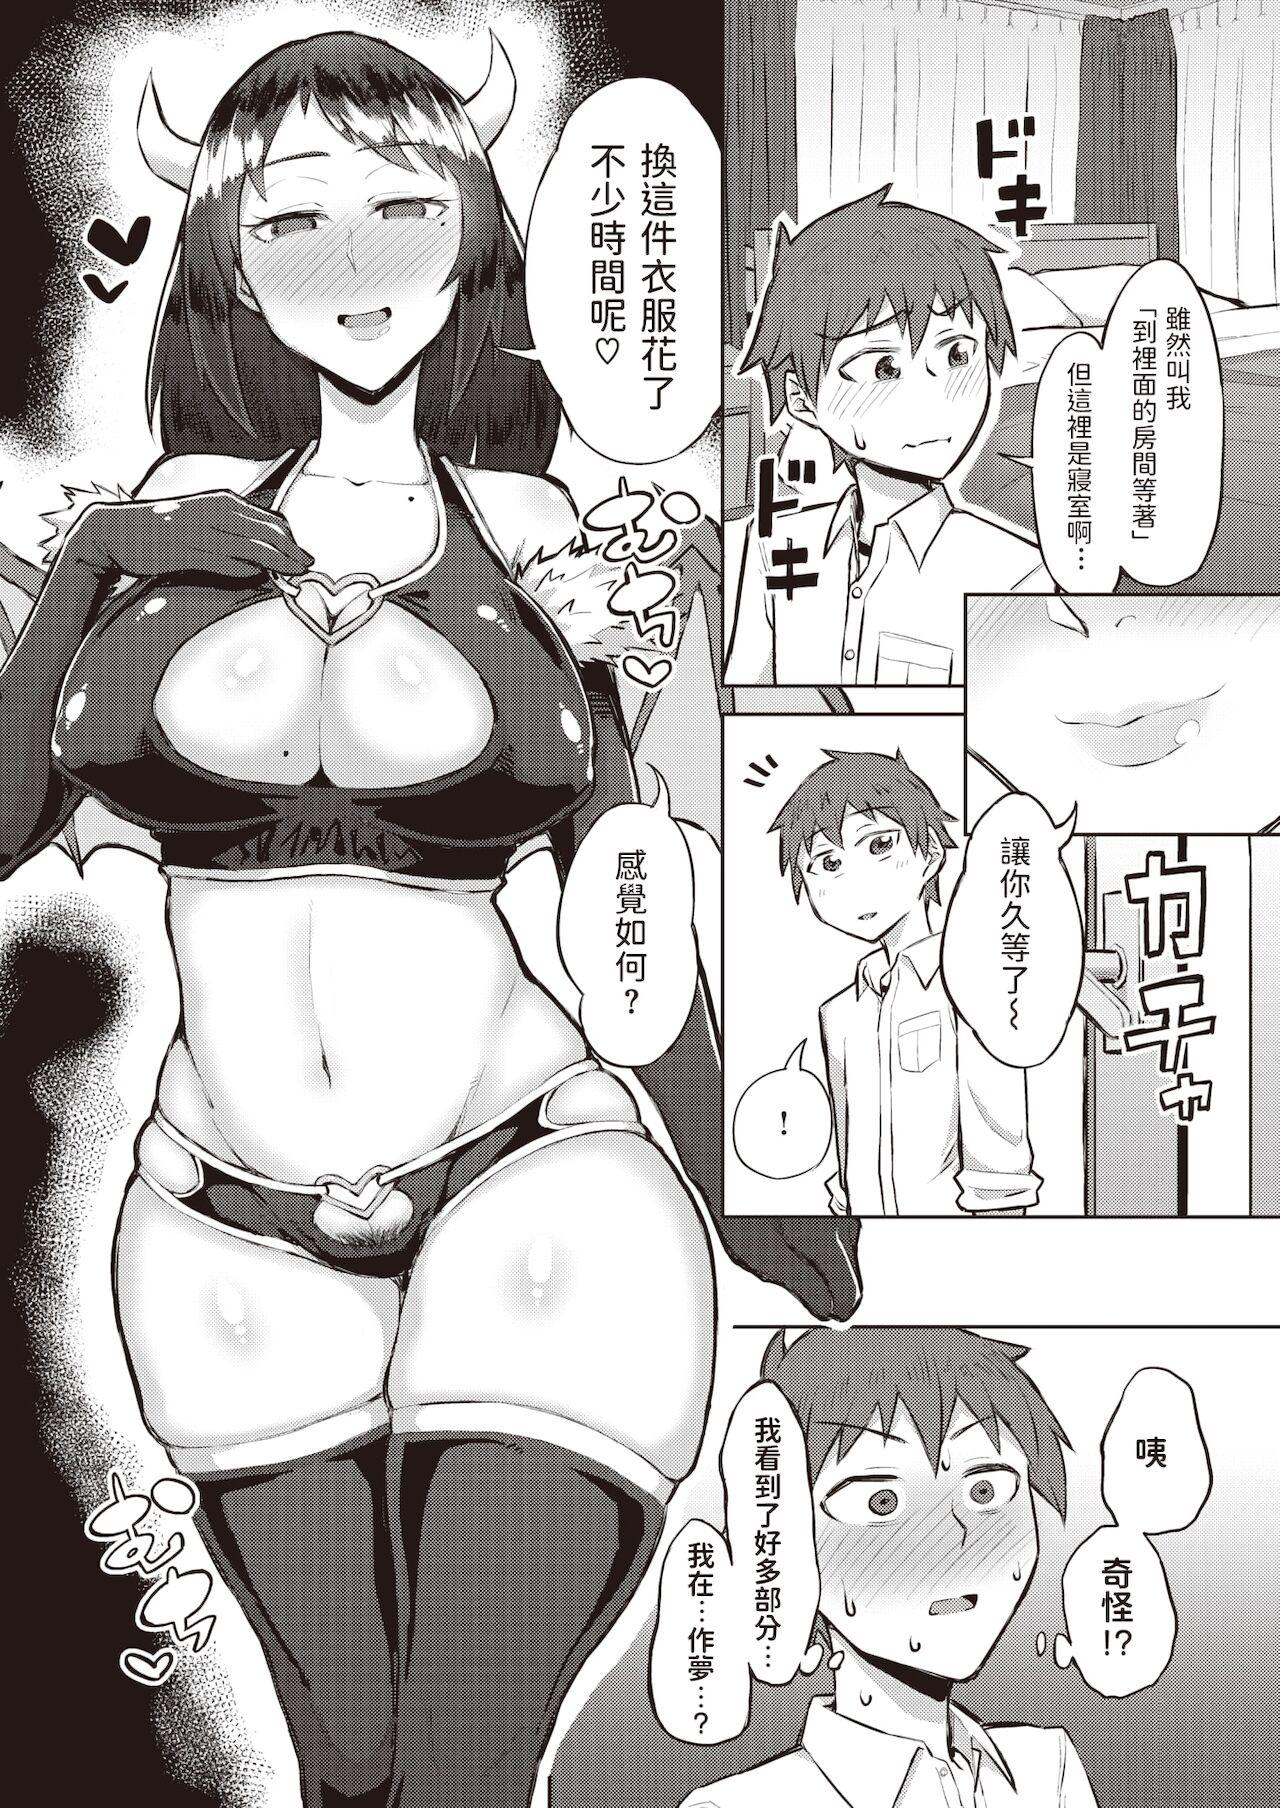 Hard Core Porn [悪天候] るっくあっとみー (COMIC 失楽天 2019年12月号) 中文翻譯 Brother Sister - Page 8